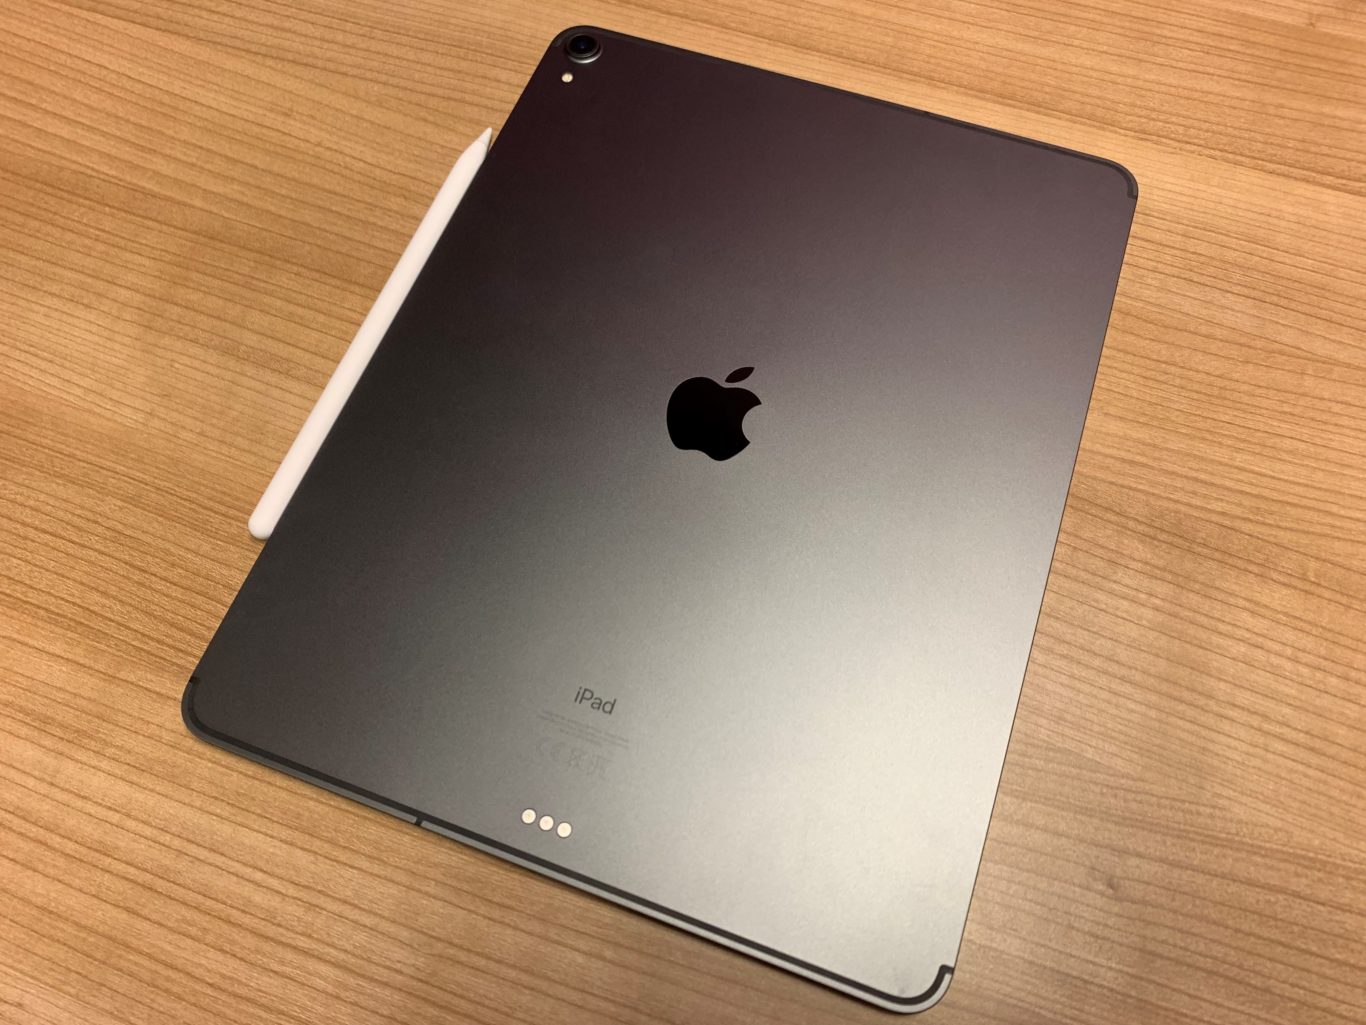 Should you buy… The new iPad Pro? | Express & Star